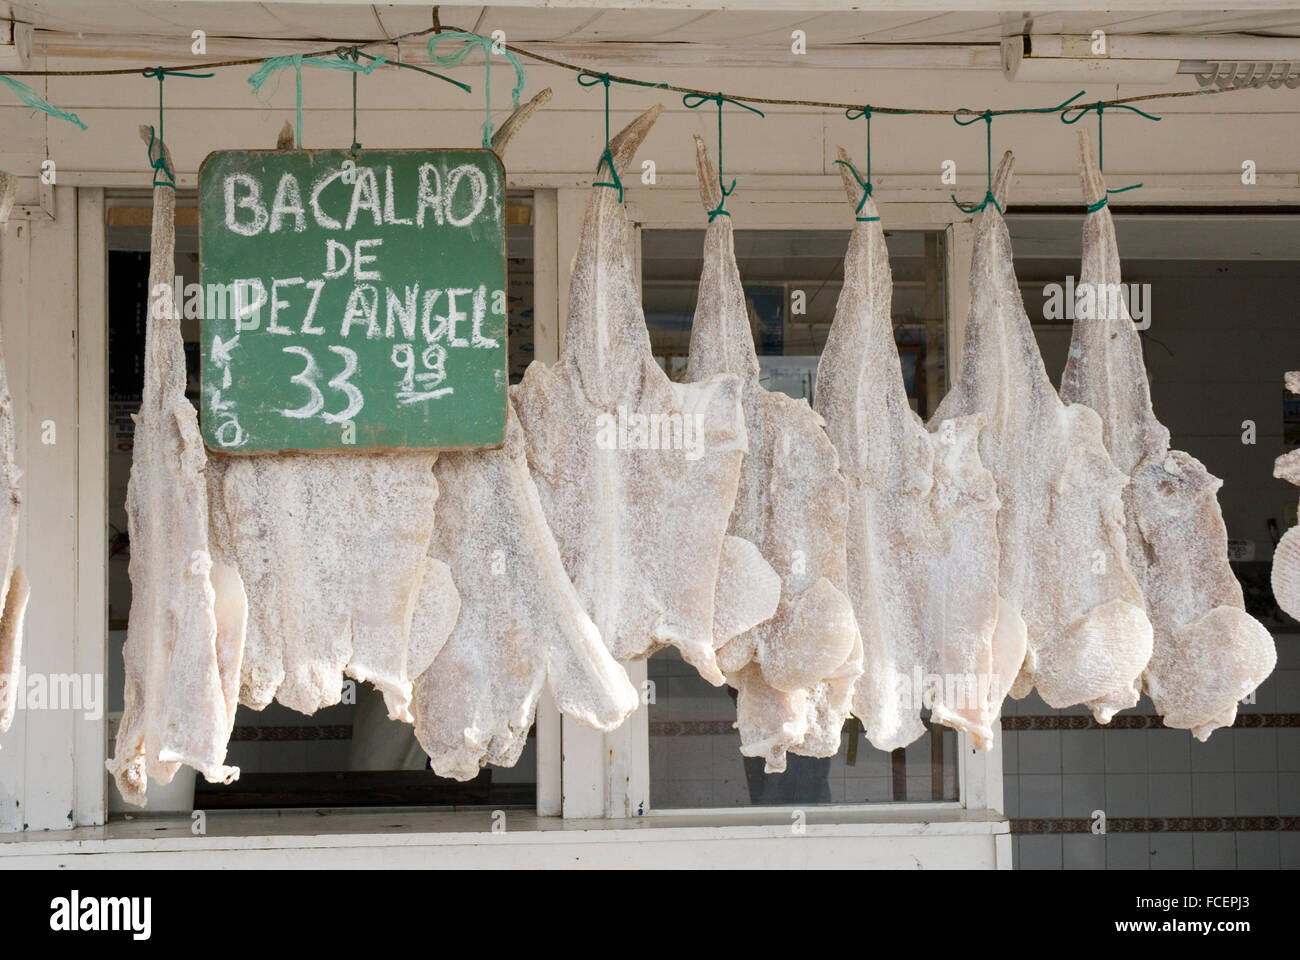 Argentina, Buenos Aires Province, Mar del Plata, Banquina de Pescadores, hanging dried cod for sale at a fishmonger's Stock Photo